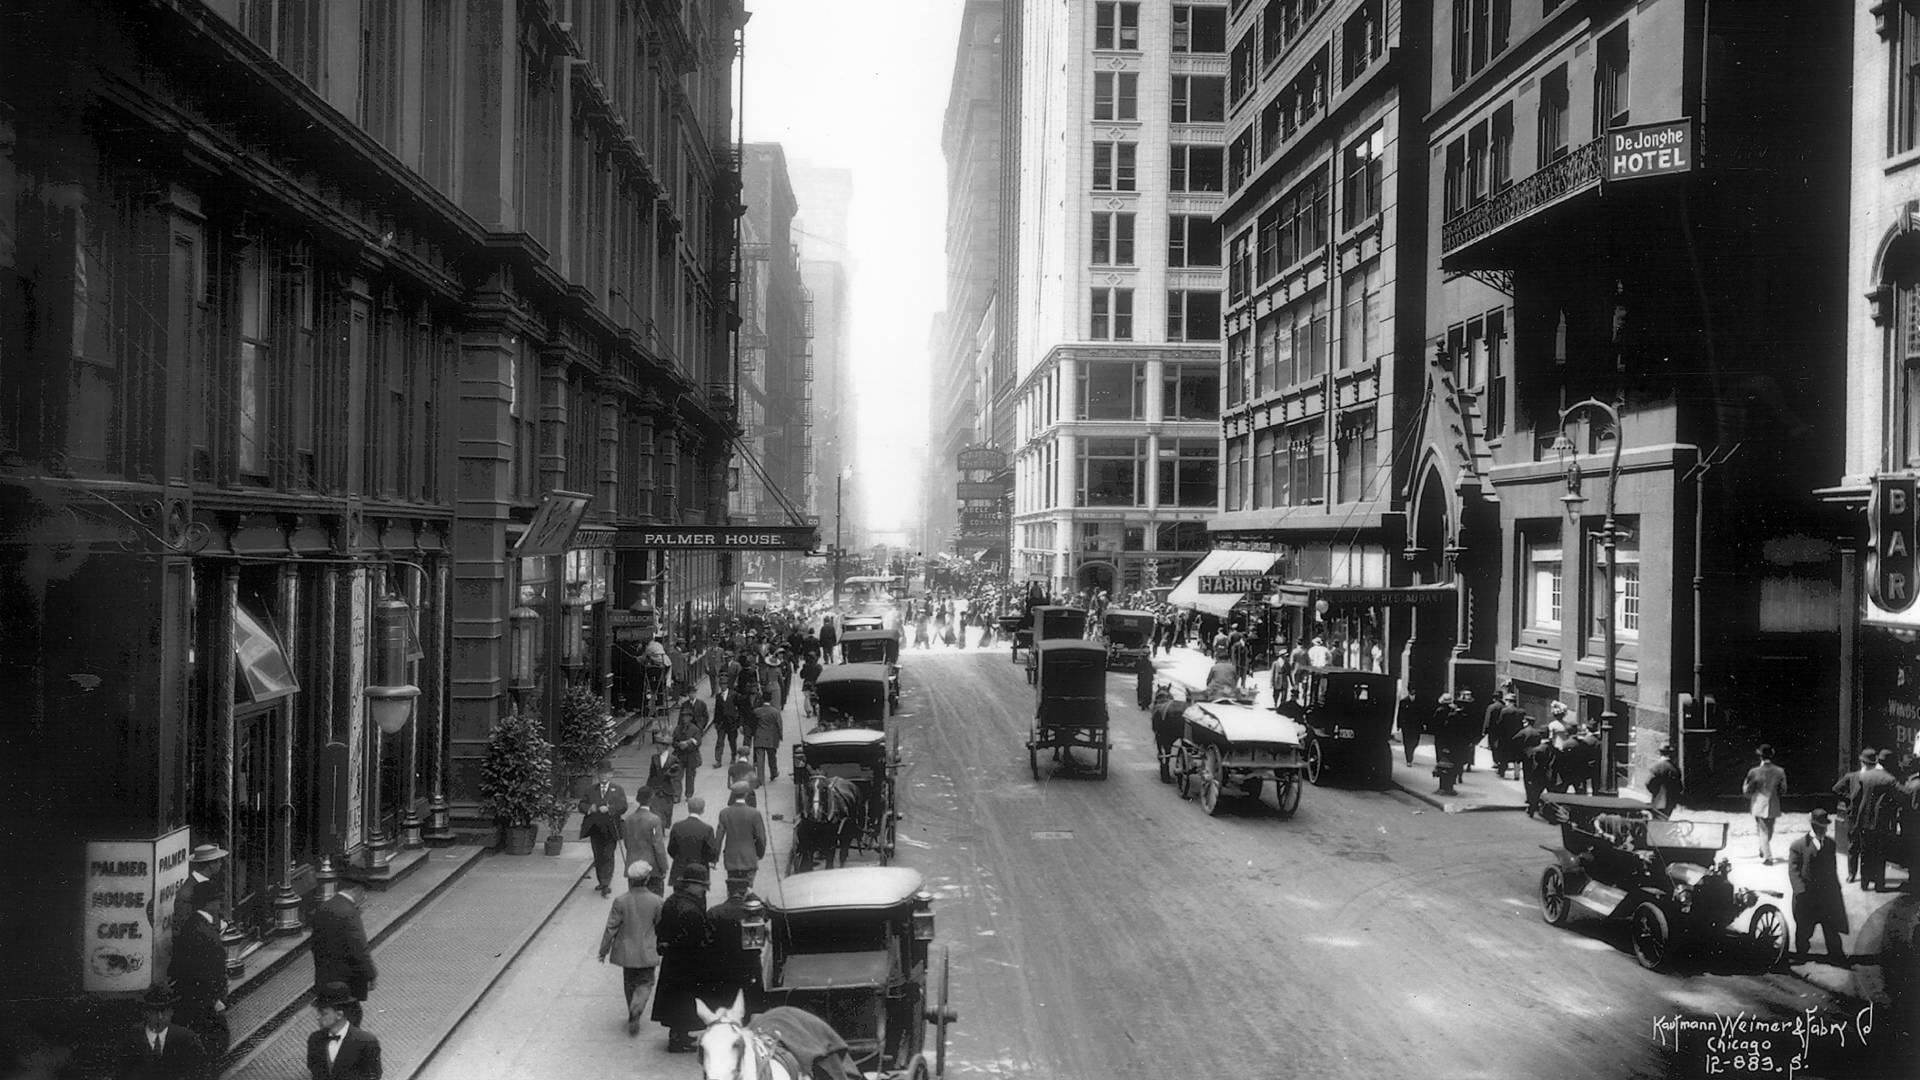 Old Black and White Picture of a Busy Street in a City